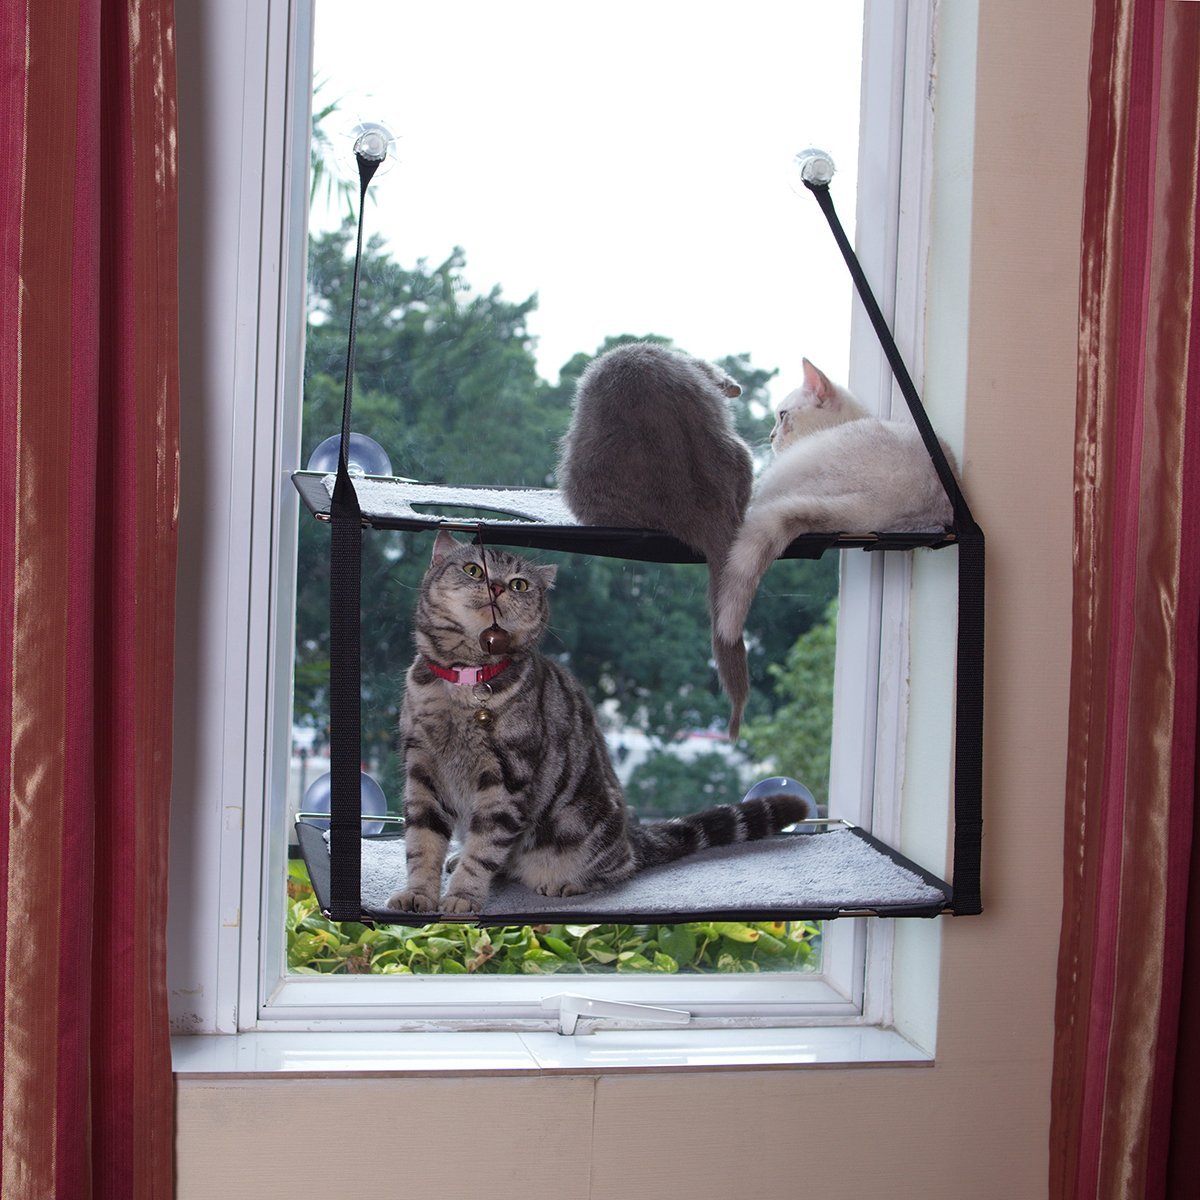 A double decker window sill hanging cat cubby.  A cat cubby!  In a window!  C'mon, that's just so spiffy.